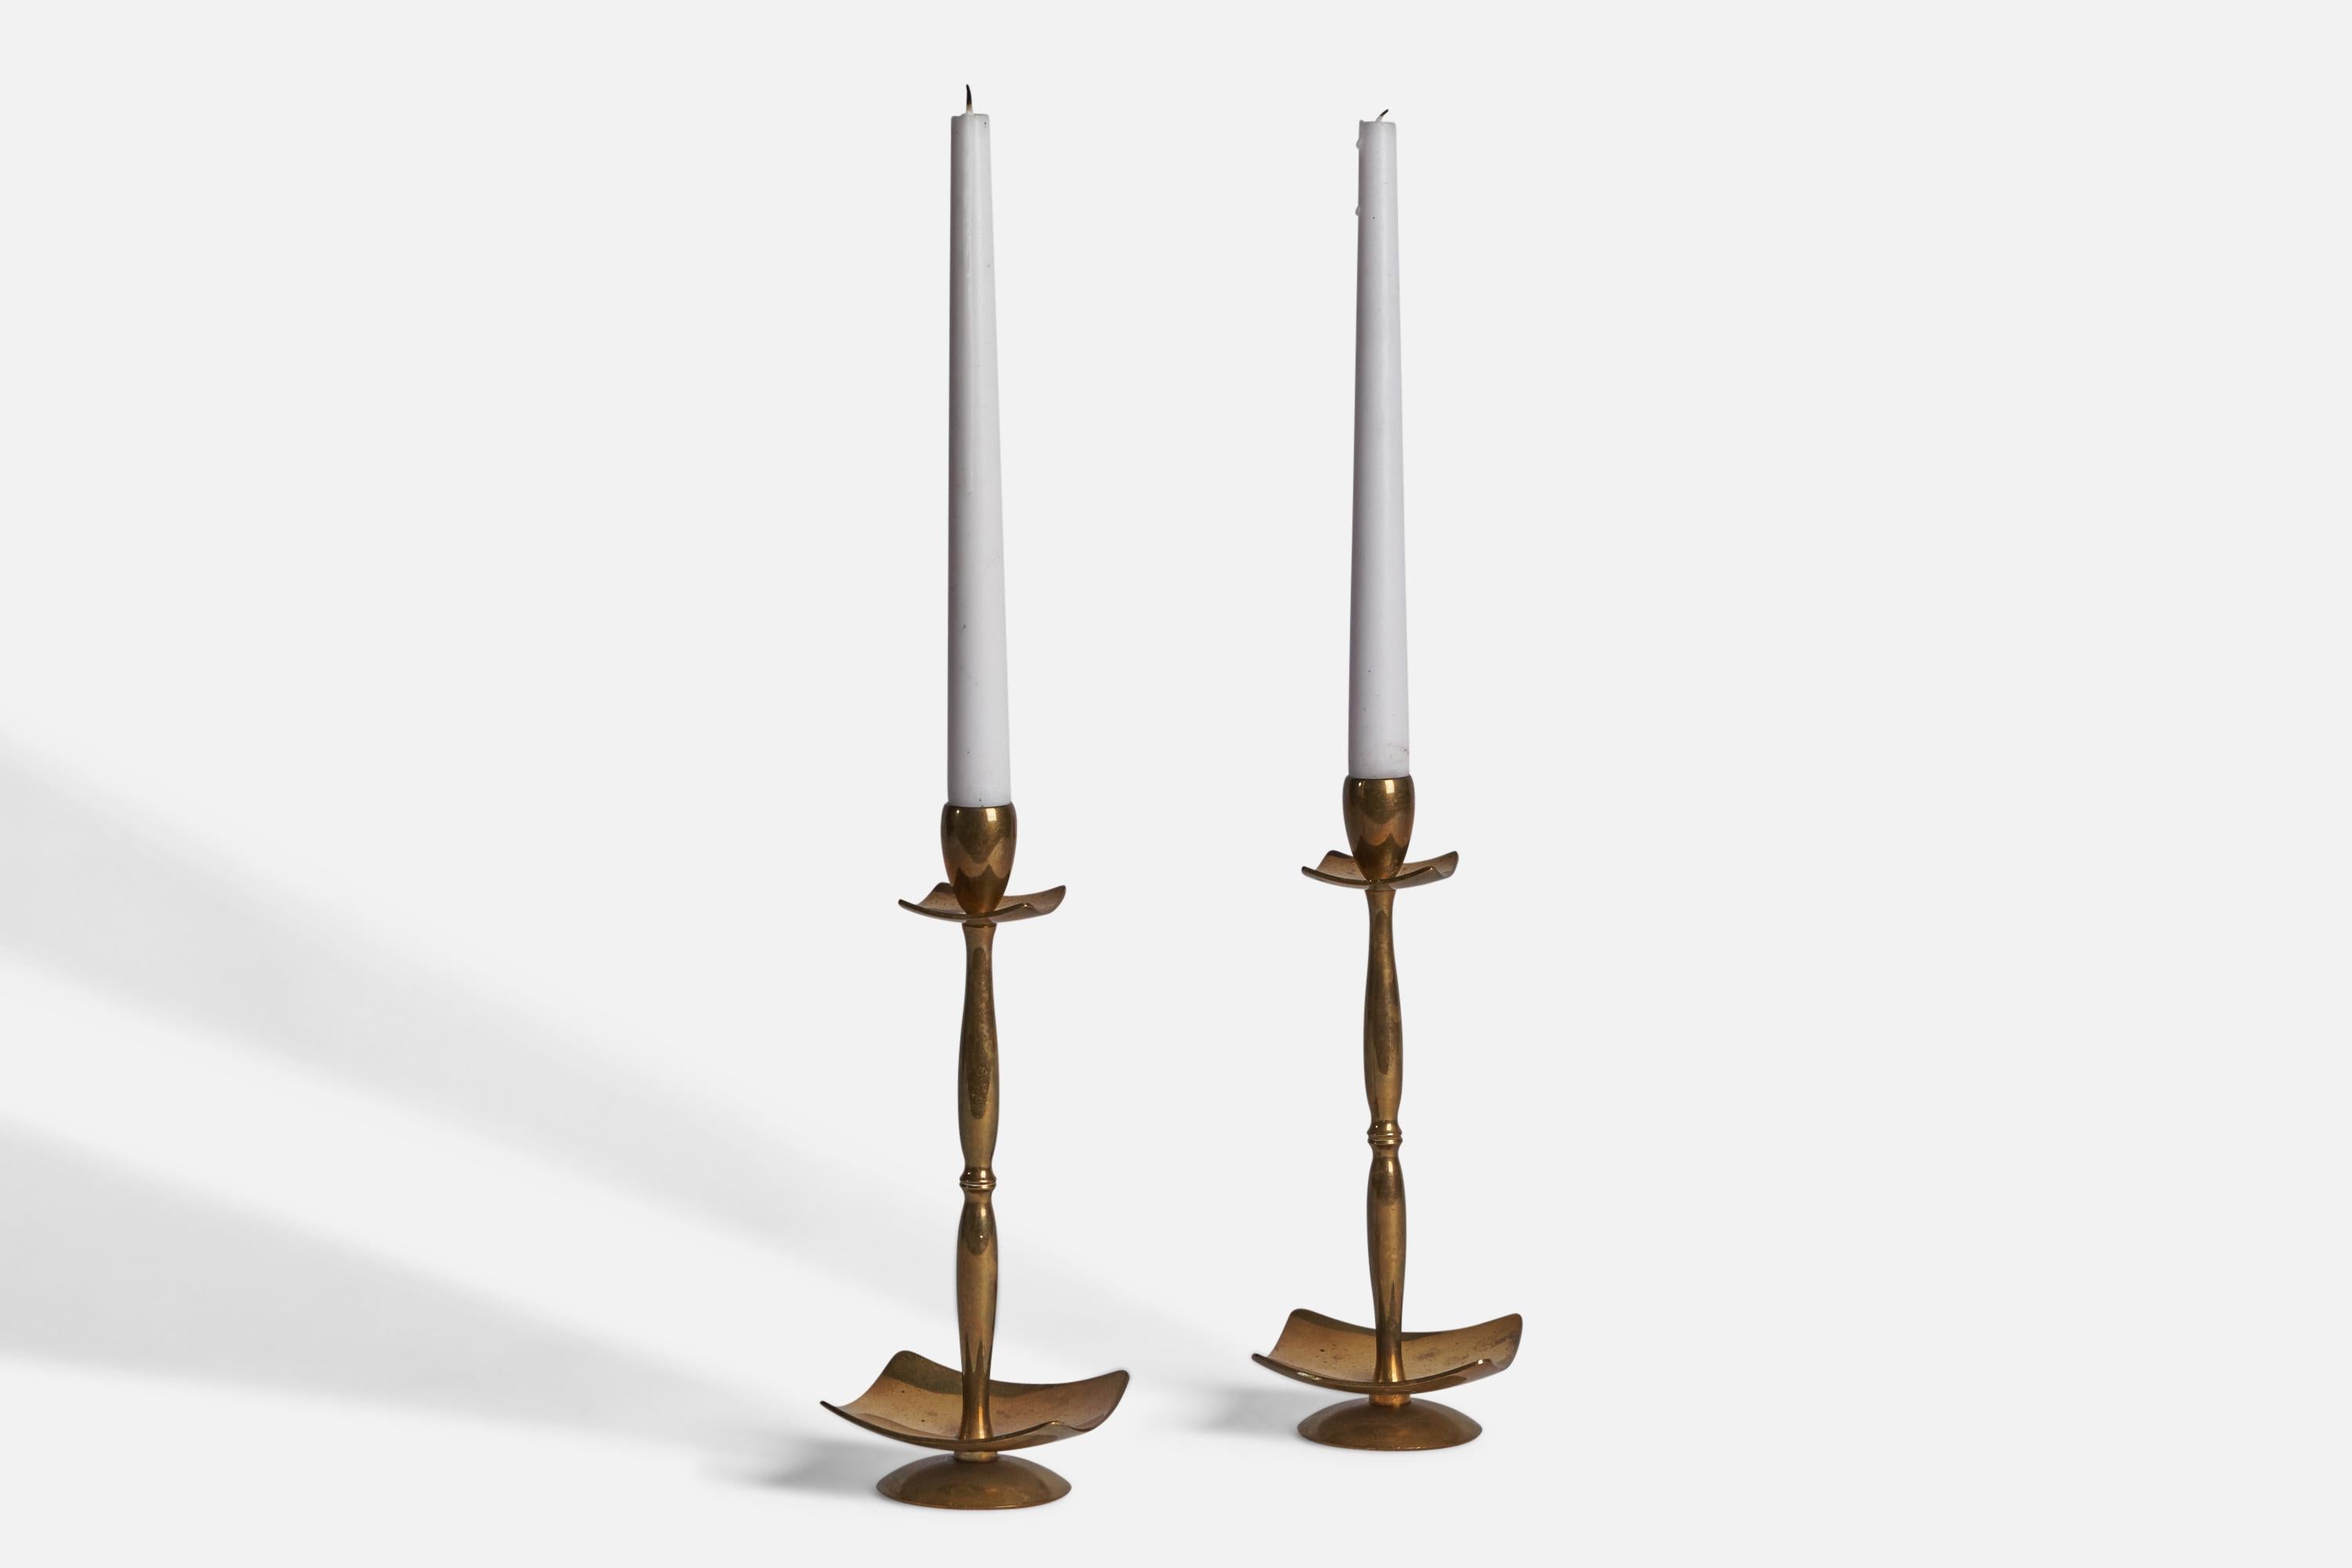 A pair of brass candlesticks designed and produced by Dantorp, Denmark, 1950s.

Fits 0.75” & 0.45” diameter candles